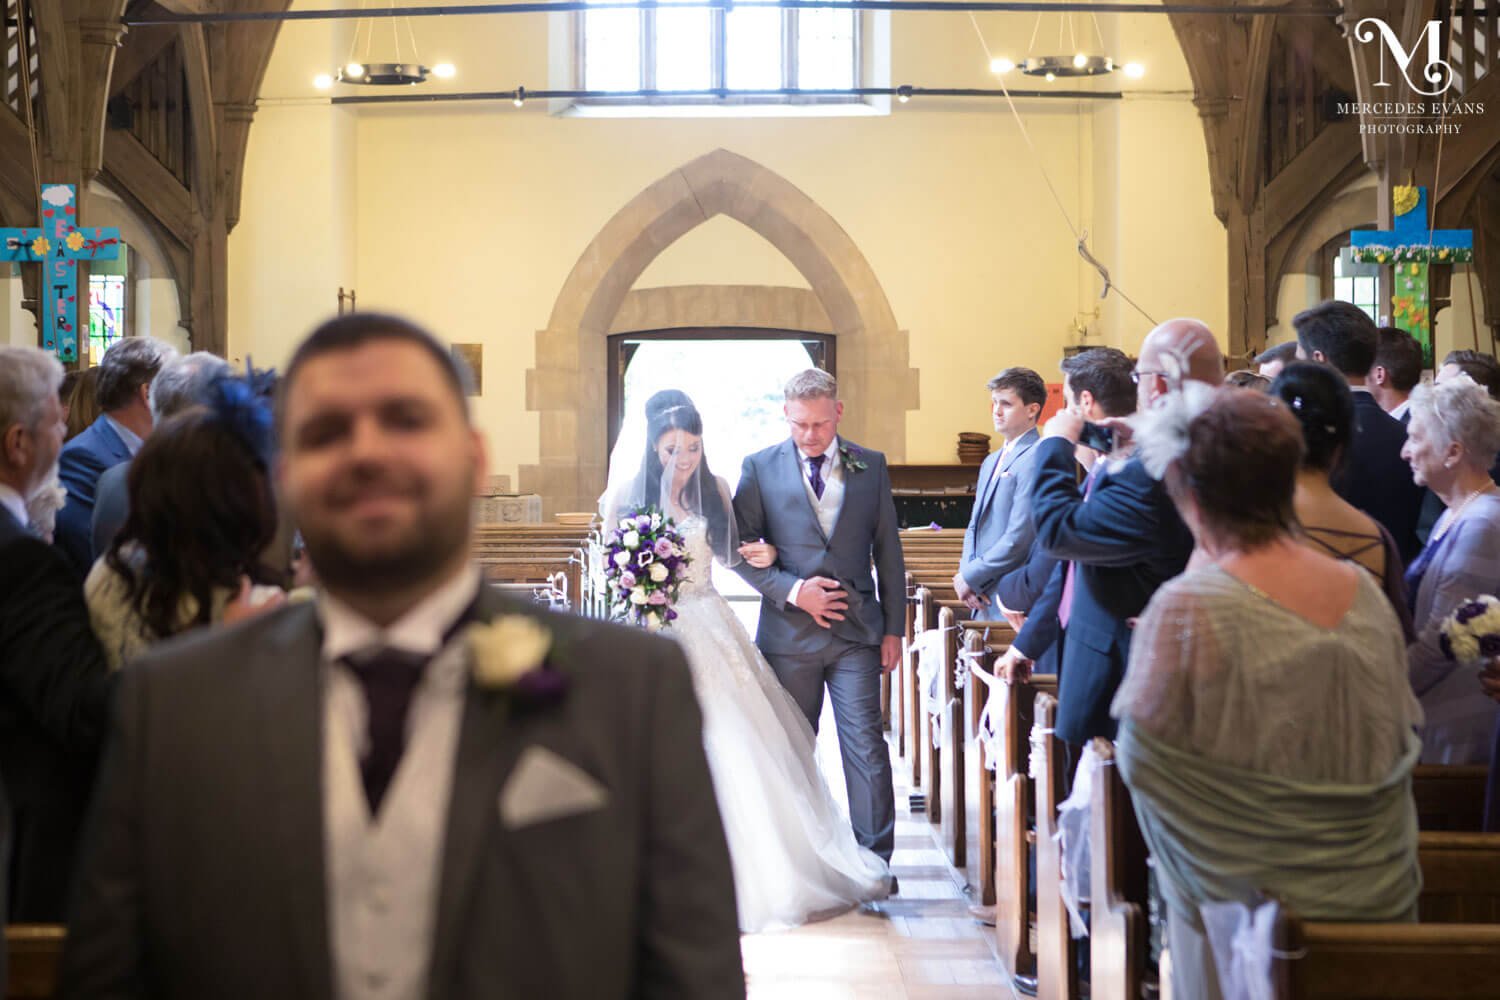 The bride walks down the aisle in St Andrew's church